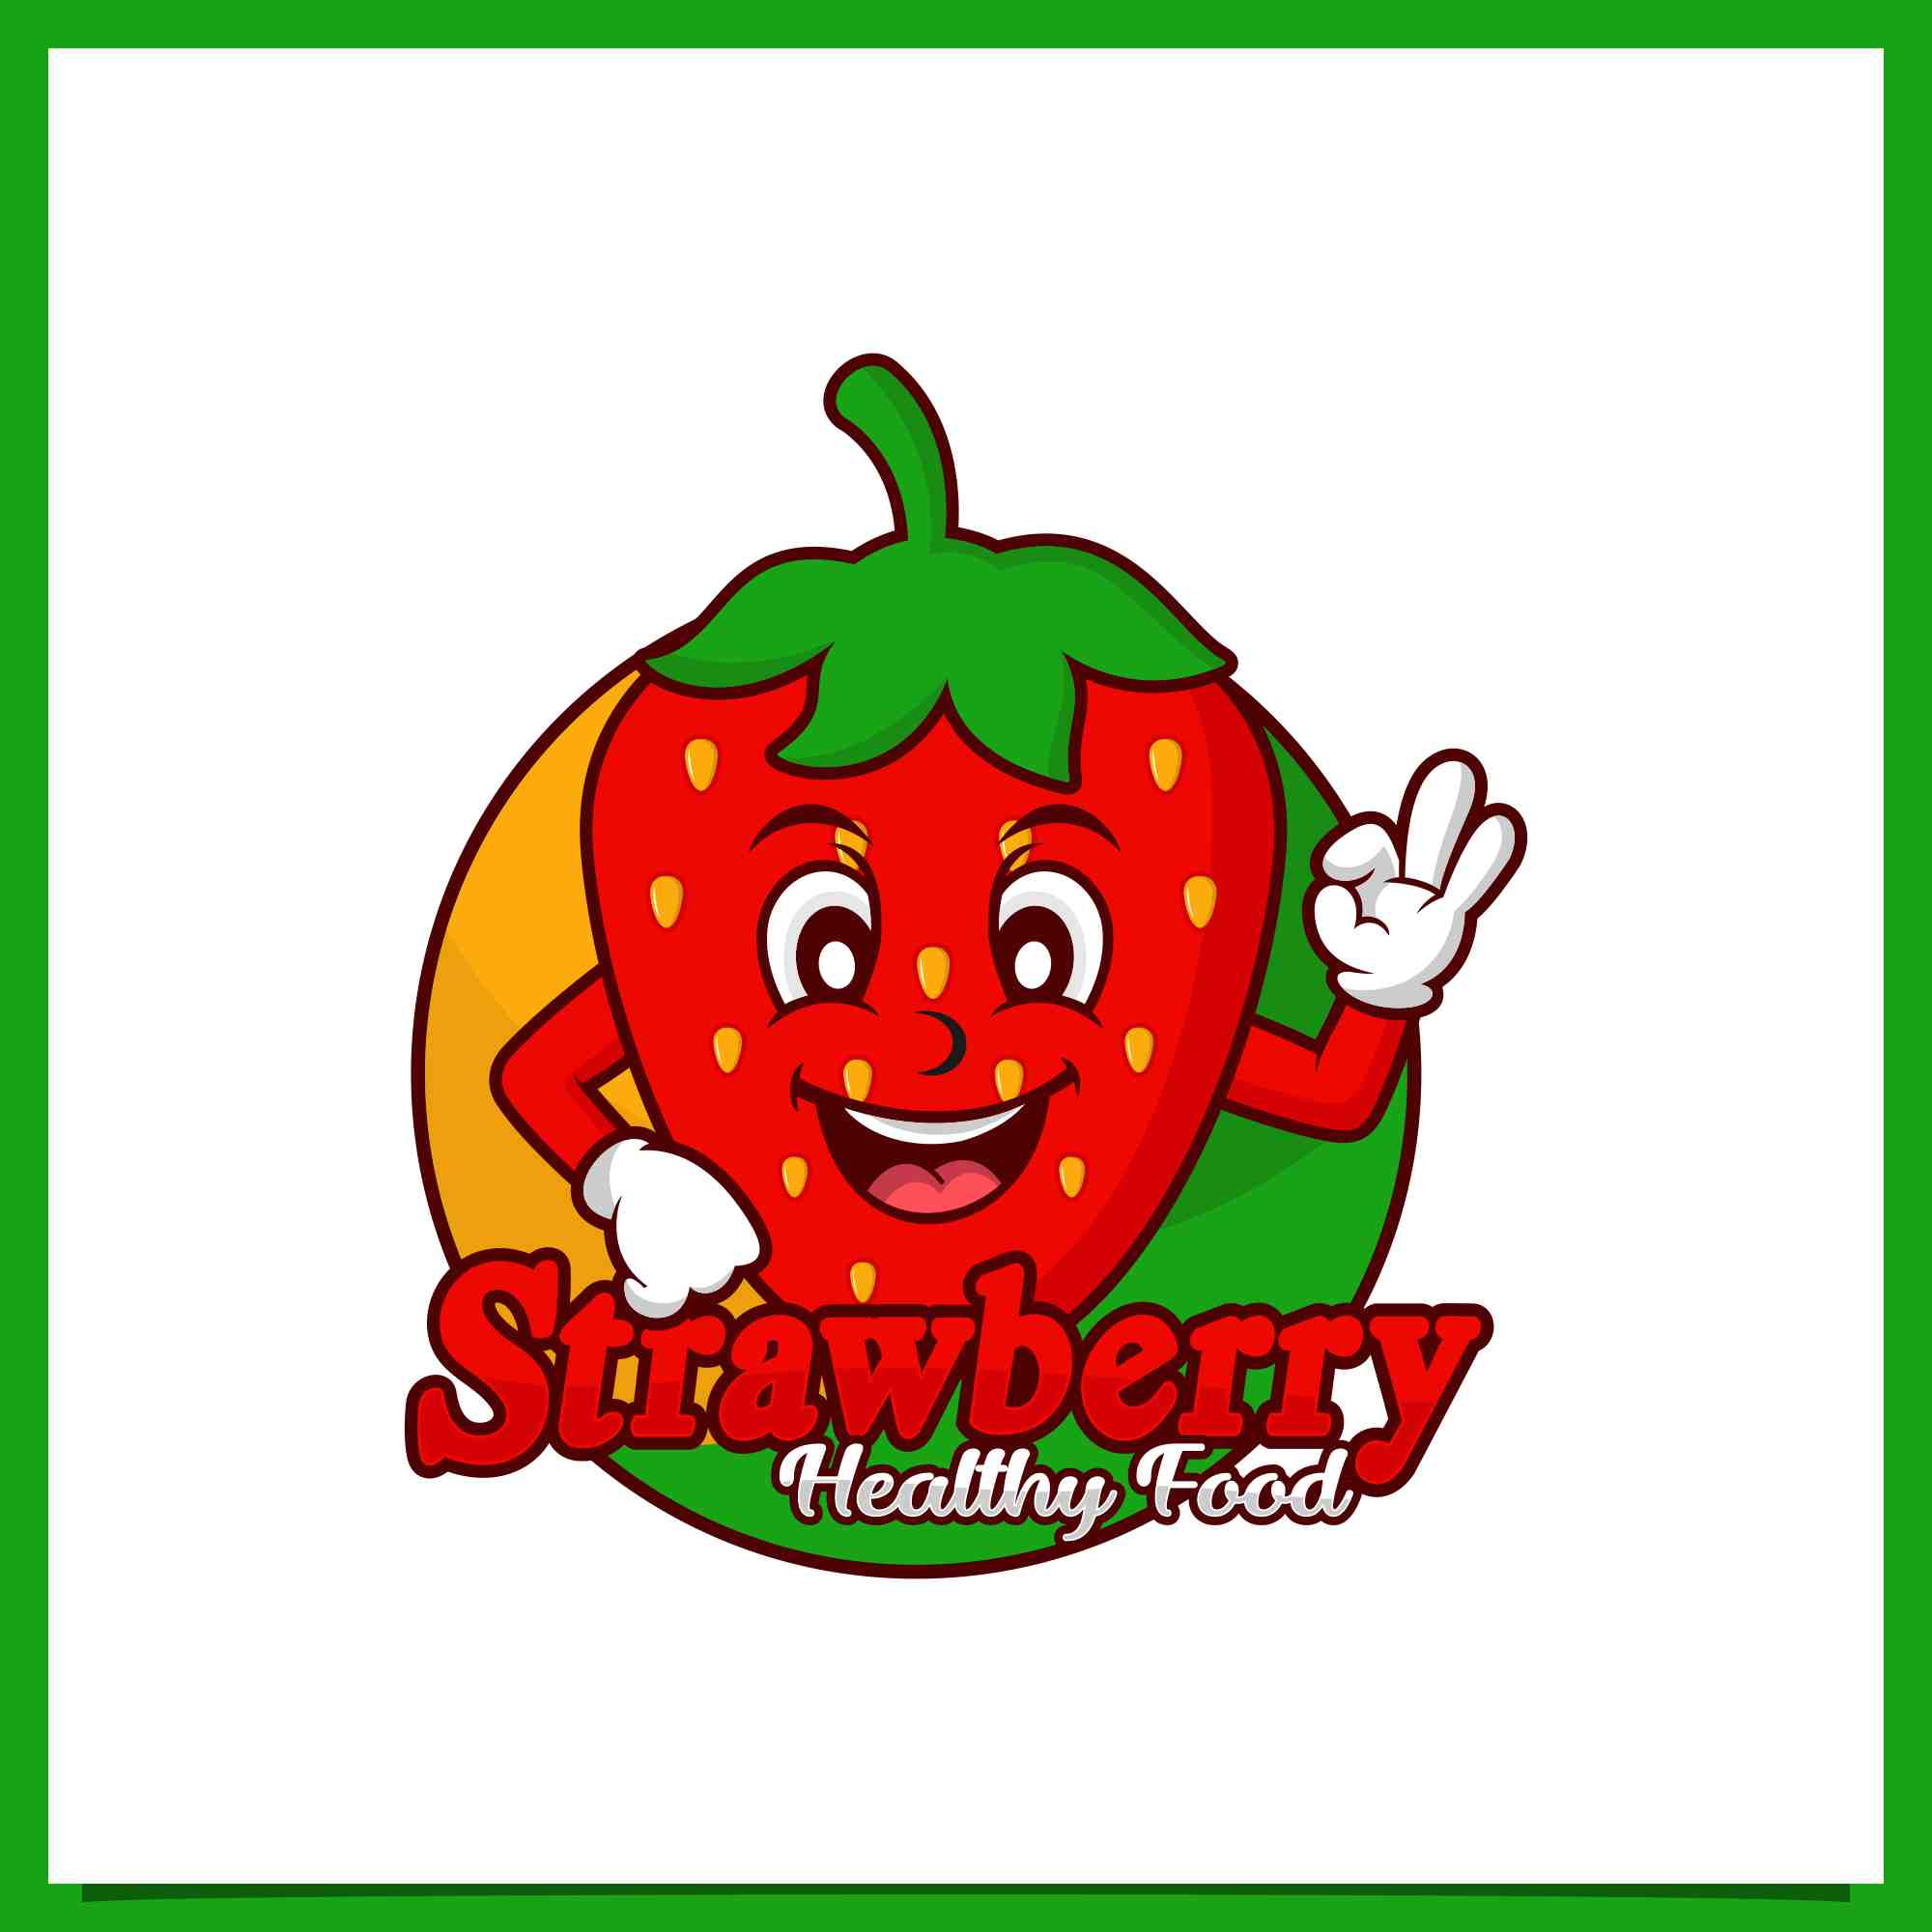 Set Strawberry fruit mascot design collection - $8 preview image.